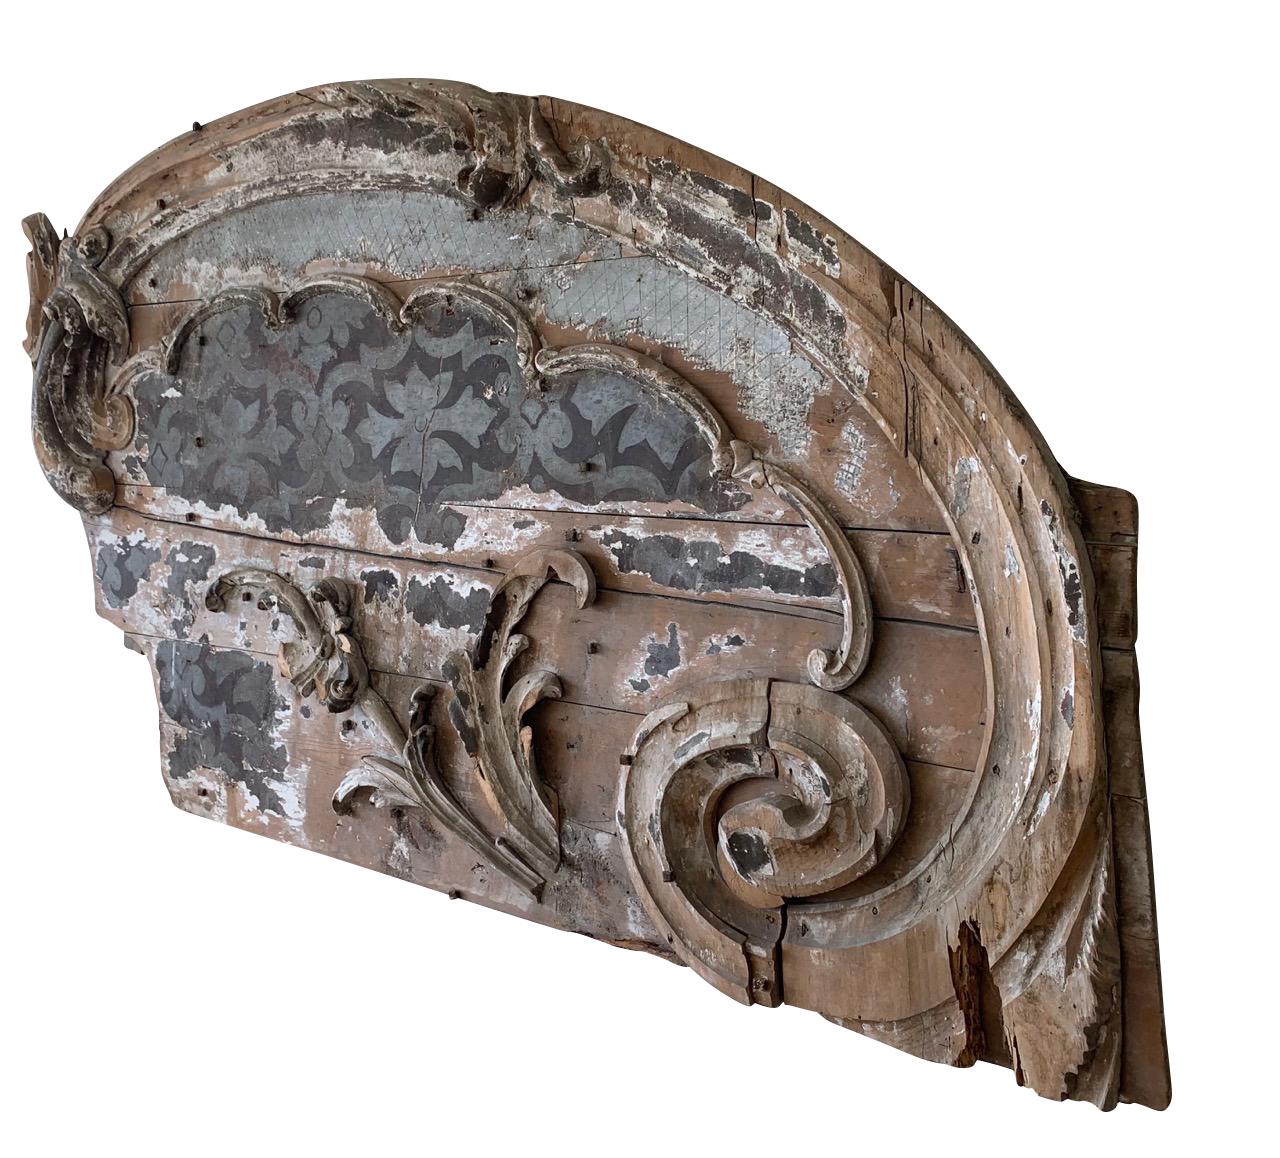 19th century Italian extra extra large carved wood wall sculpture.
Very unusual and decorative
Hand carved and areas of decorative painting
Beautiful natural patina
Originally used as a prop in Italian operas.